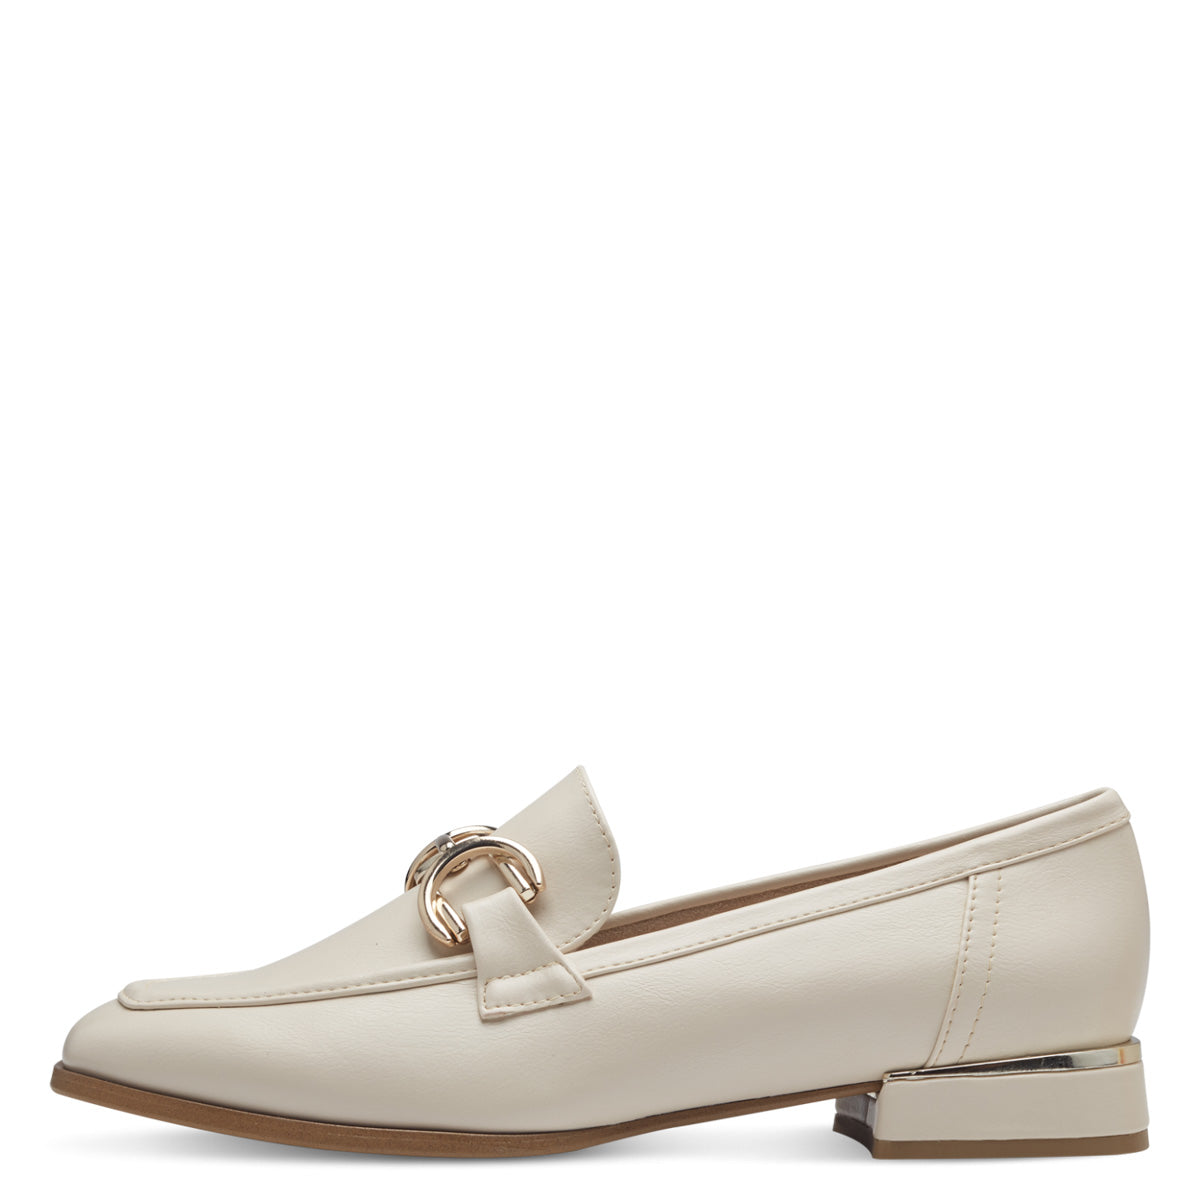 Front view of Marco Tozzi Cream Loafer showcasing its sleek design.